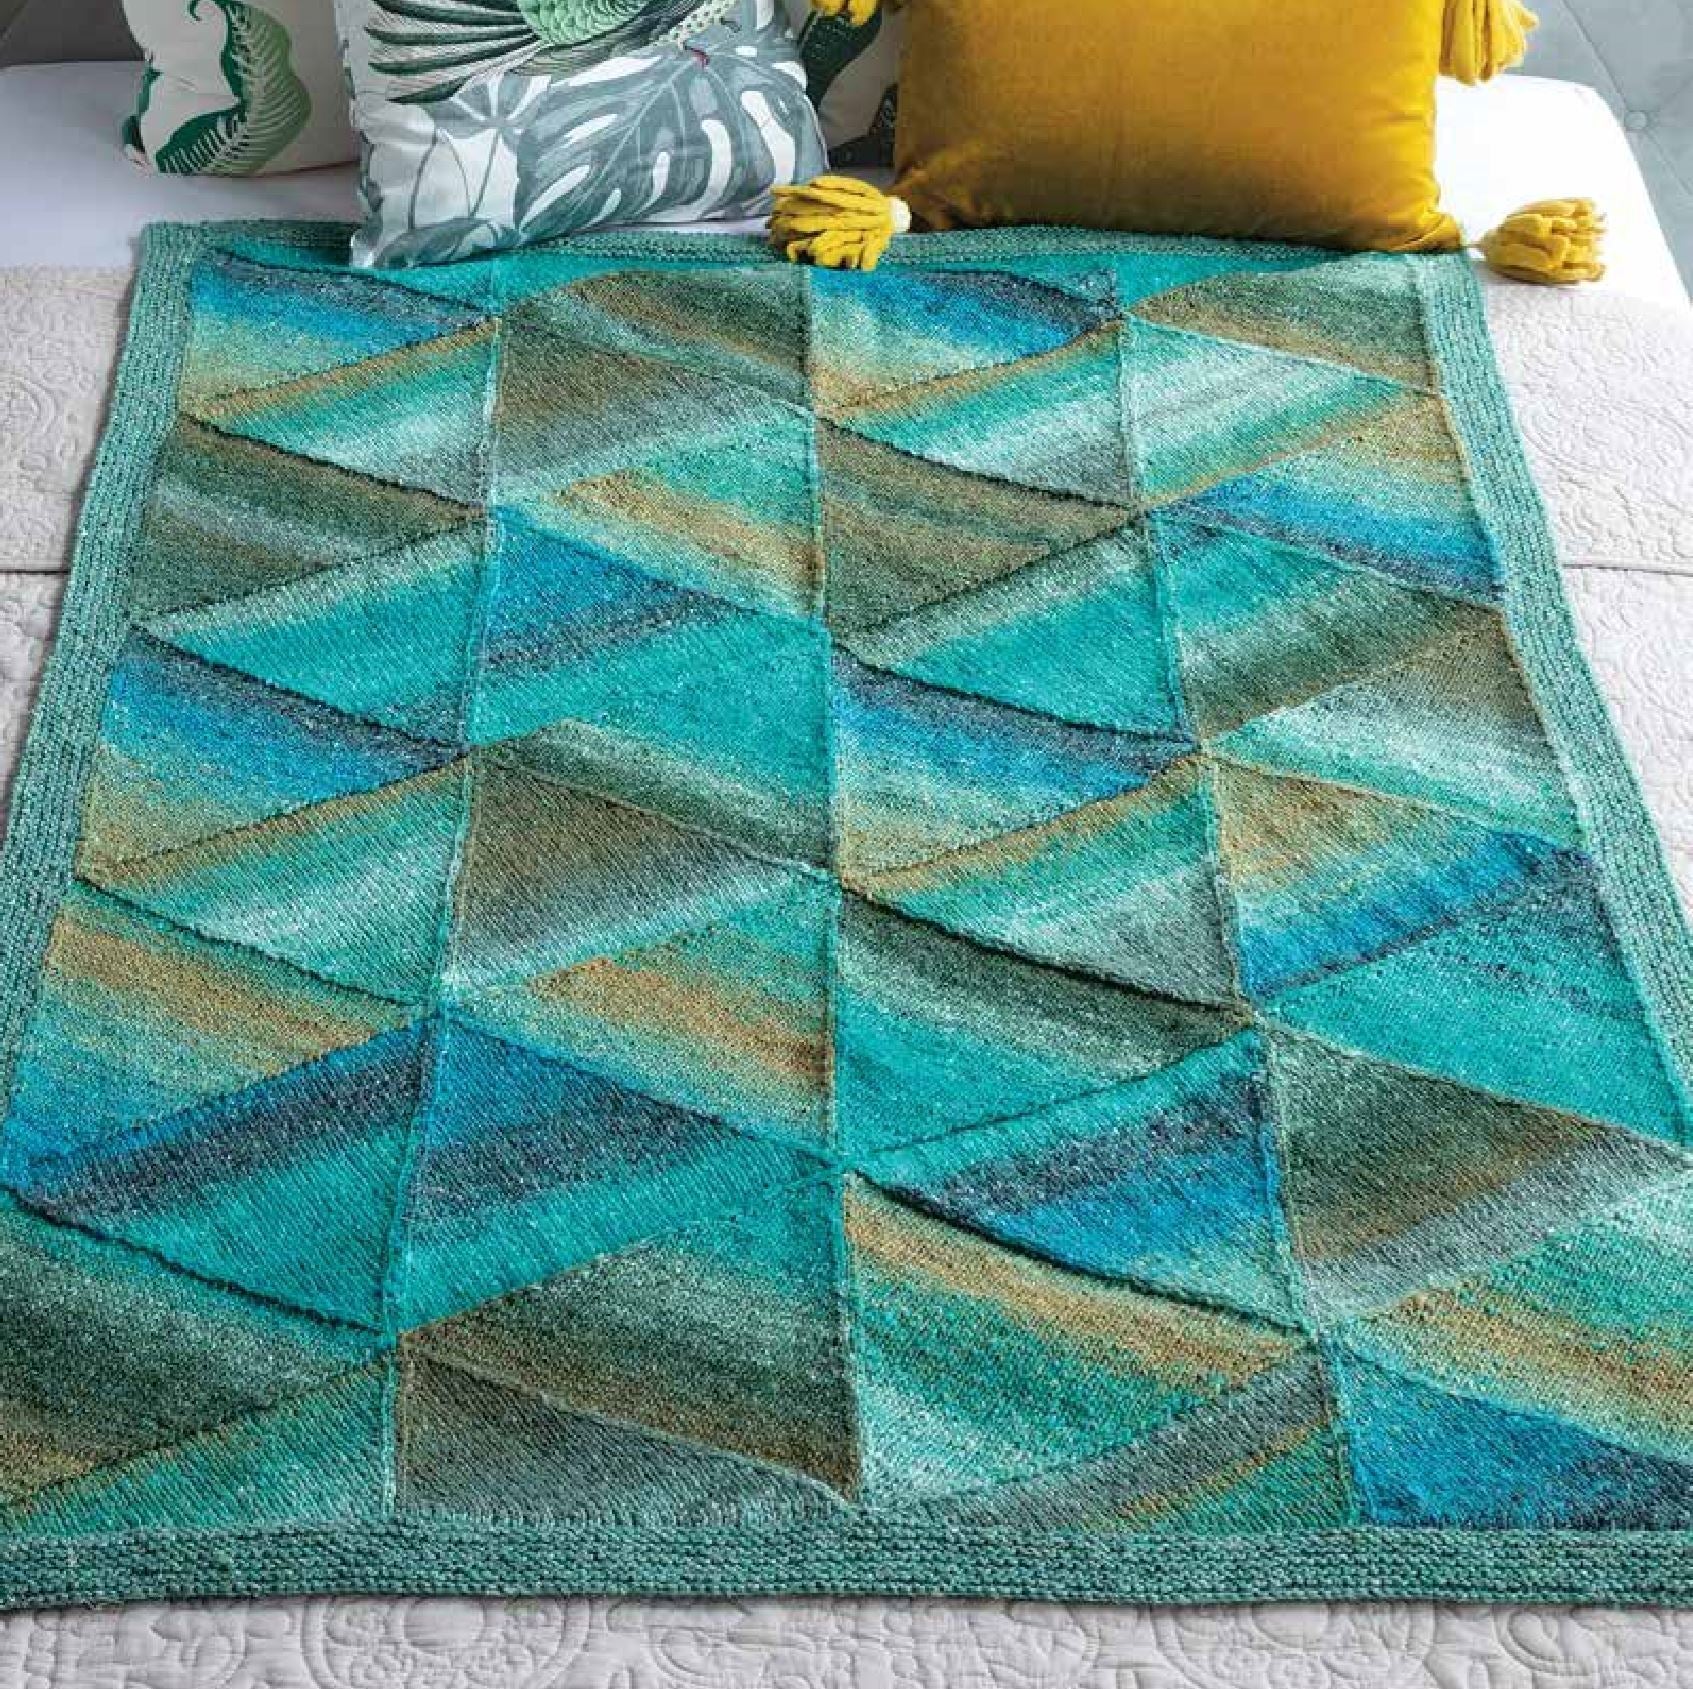 Mitered Blanket Pattern by Noro Noro